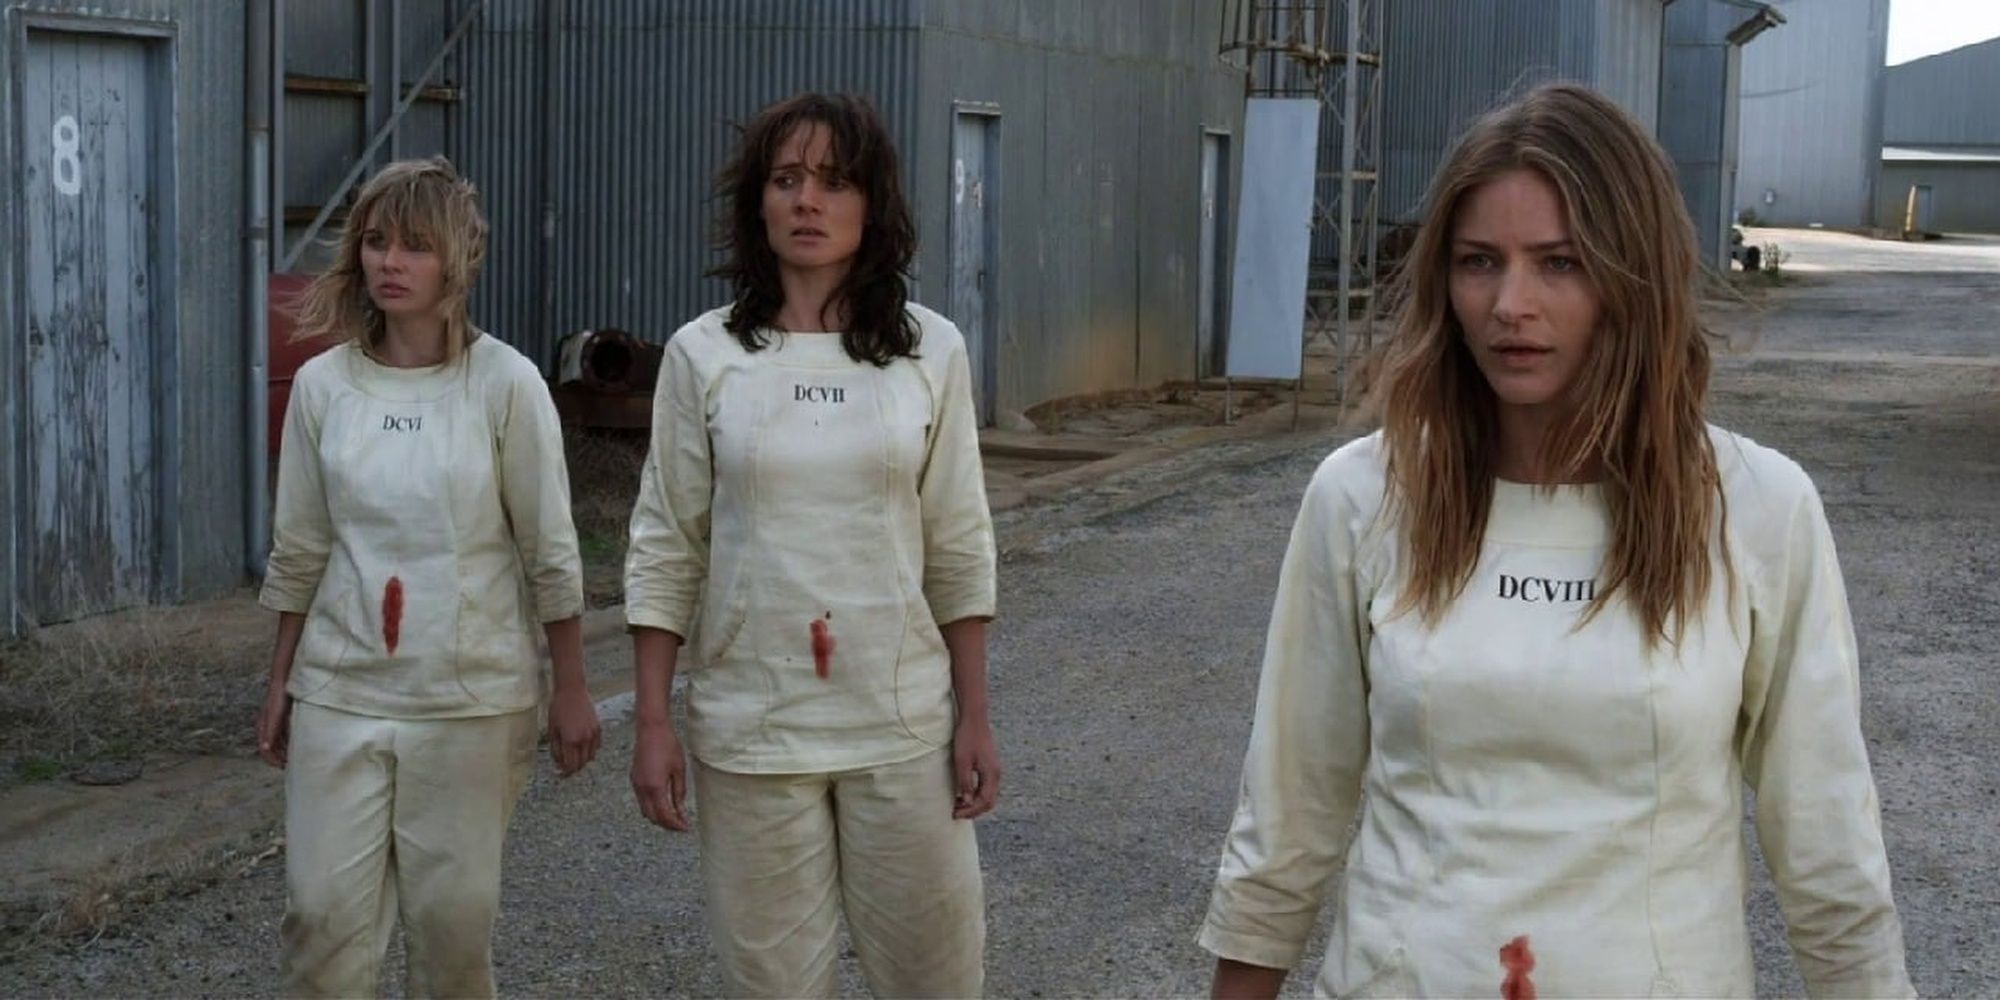 Three women stand with blood-stained shirts